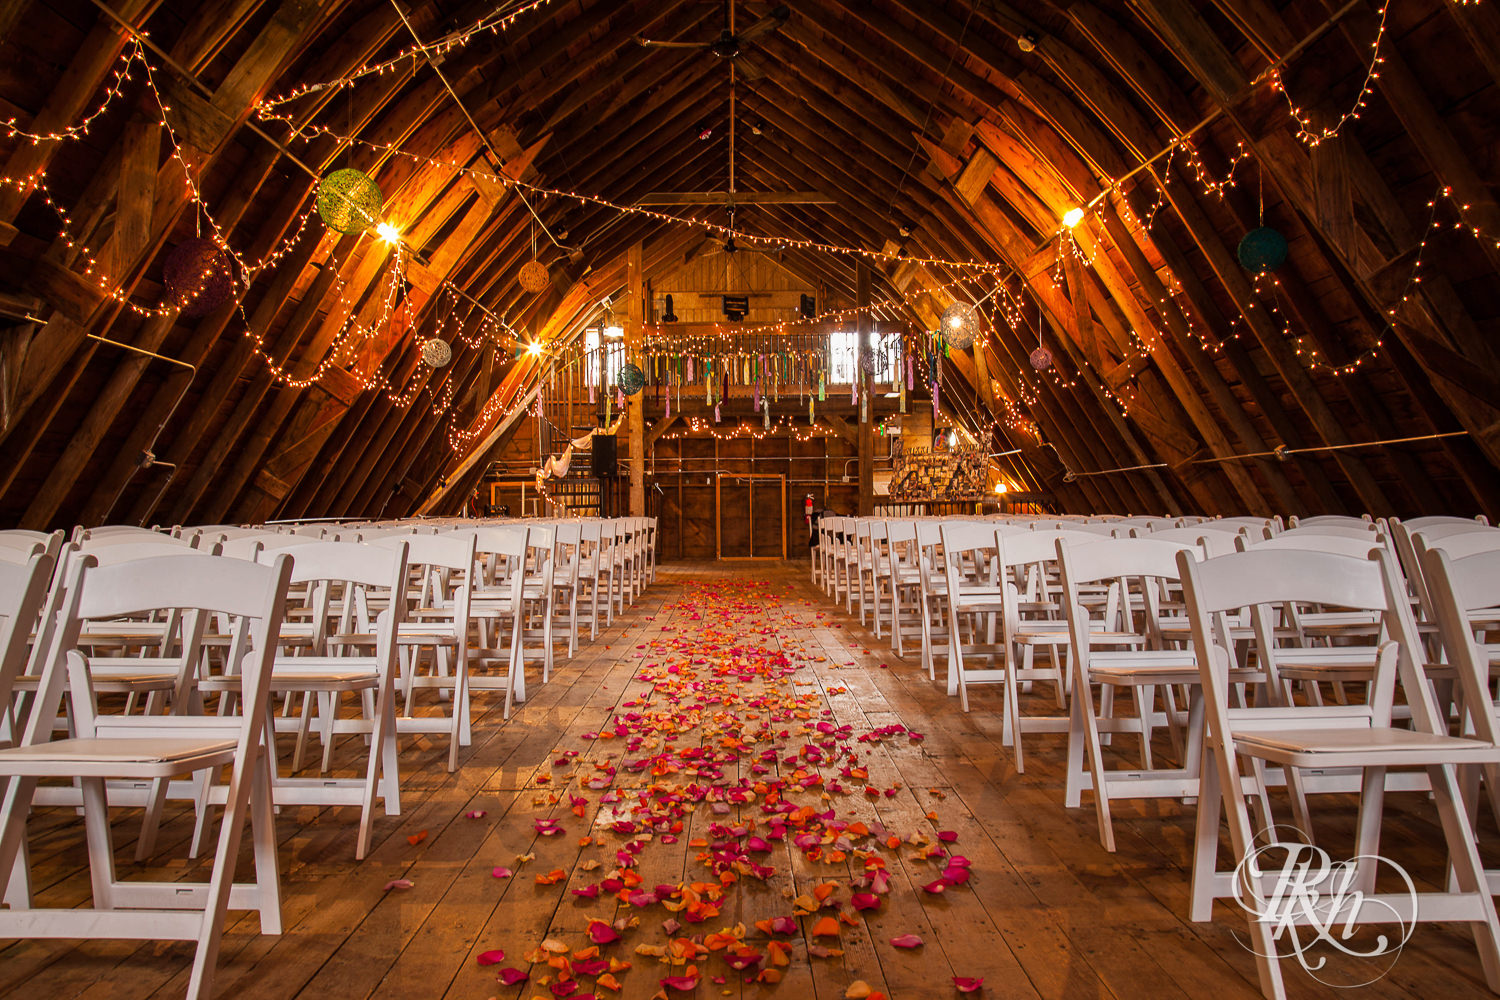 Indoor barn wedding ceremony space at Coops Event Barn in Dodge Center, Minnesota.